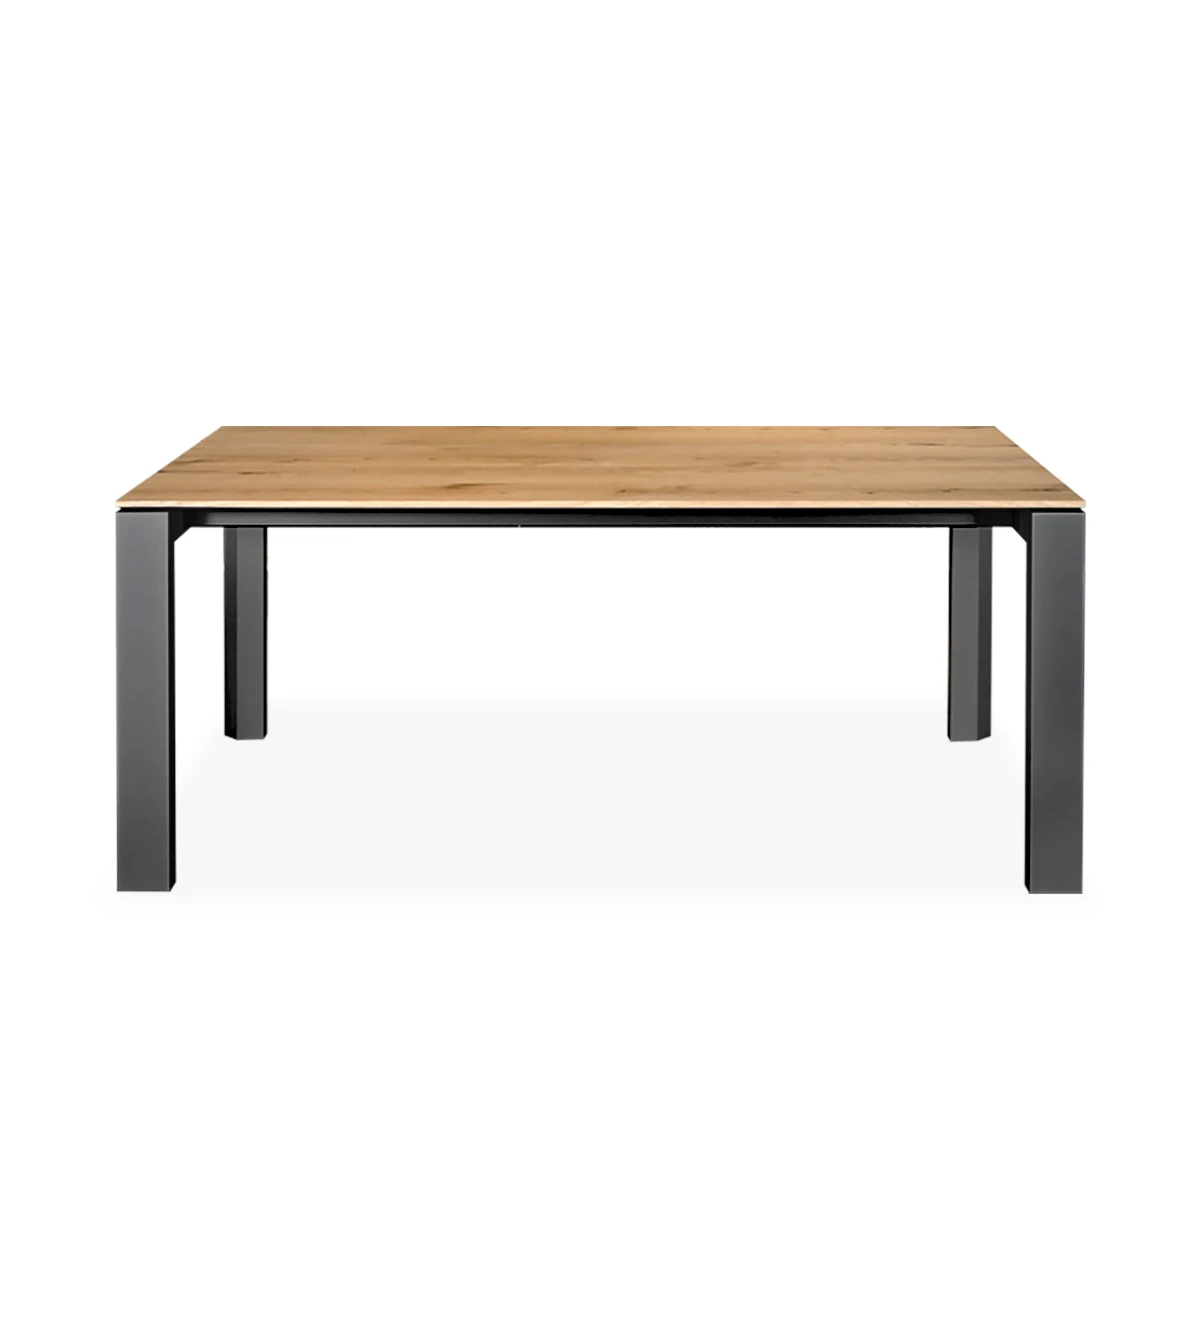 Rectangular extendable dining table with natural oak top, black lacquered metal legs.